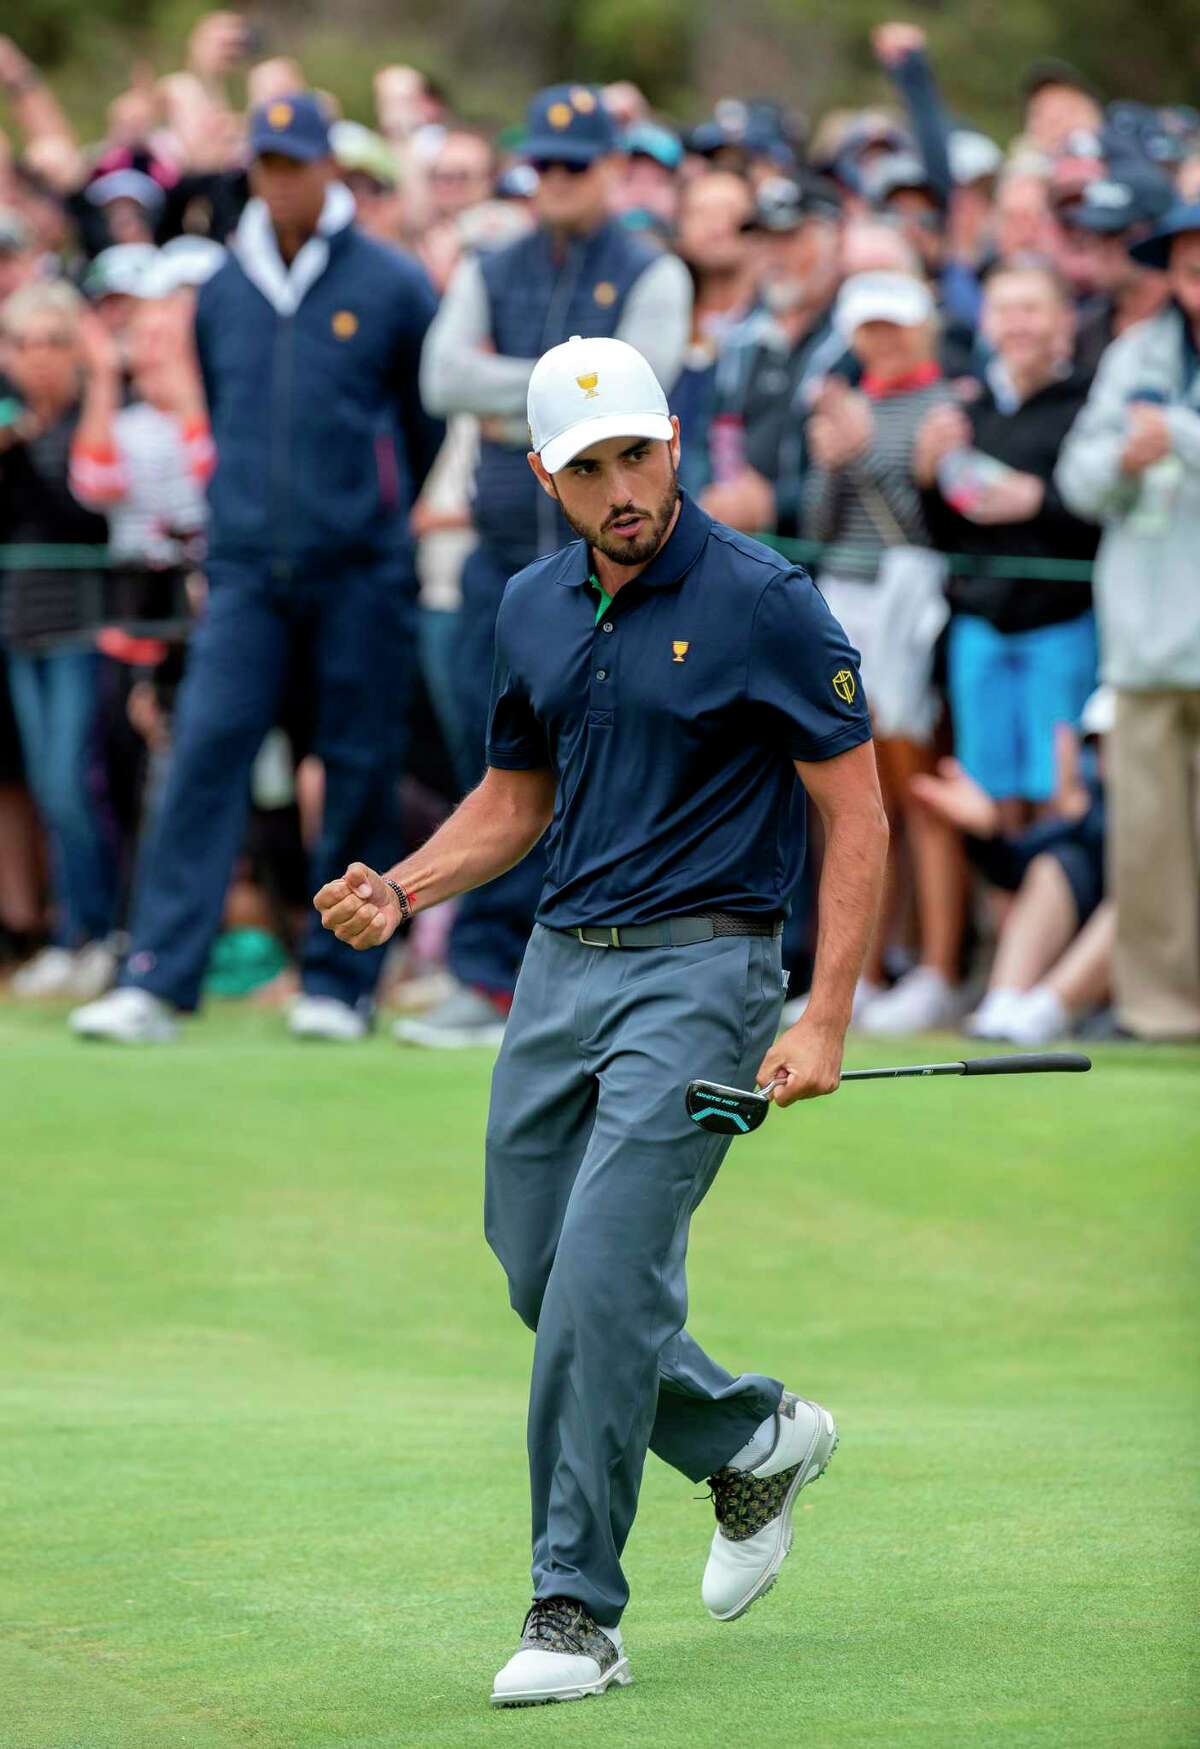 International team member Abraham Ancer of Mexico celebrates sinking a putt to win his match during the Presidents Cup golf tournament in Melbourne on December 14, 2019. (Photo by SIMON BAKER / AFP) / -- IMAGE RESTRICTED TO EDITORIAL USE - STRICTLY NO COMMERCIAL USE -- (Photo by SIMON BAKER/AFP via Getty Images)